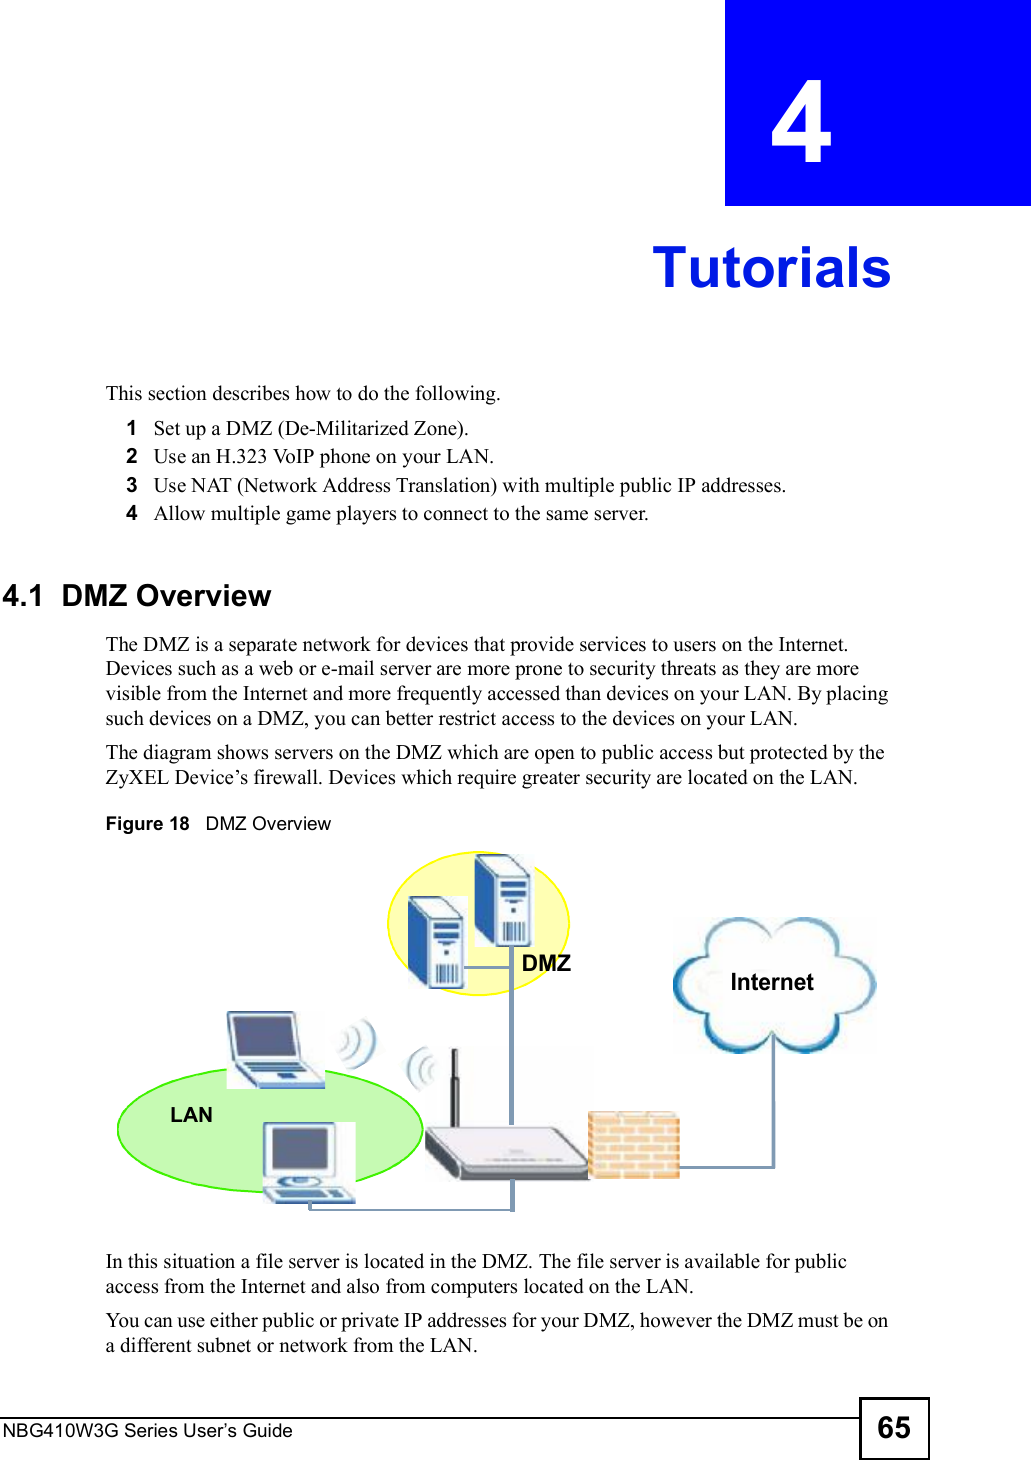 NBG410W3G Series User s Guide 65CHAPTER  4 TutorialsThis section describes how to do the following.1Set up a DMZ (De-Militarized Zone). 2Use an H.323 VoIP phone on your LAN. 3Use NAT (Network Address Translation) with multiple public IP addresses.4Allow multiple game players to connect to the same server.4.1  DMZ OverviewThe DMZ is a separate network for devices that provide services to users on the Internet. Devices such as a web or e-mail server are more prone to security threats as they are more visible from the Internet and more frequently accessed than devices on your LAN. By placing such devices on a DMZ, you can better restrict access to the devices on your LAN.The diagram shows servers on the DMZ which are open to public access but protected by the ZyXEL Device!s firewall. Devices which require greater security are located on the LAN. Figure 18   DMZ OverviewIn this situation a file server is located in the DMZ. The file server is available for public access from the Internet and also from computers located on the LAN.  You can use either public or private IP addresses for your DMZ, however the DMZ must be on a different subnet or network from the LAN. InternetDMZLAN